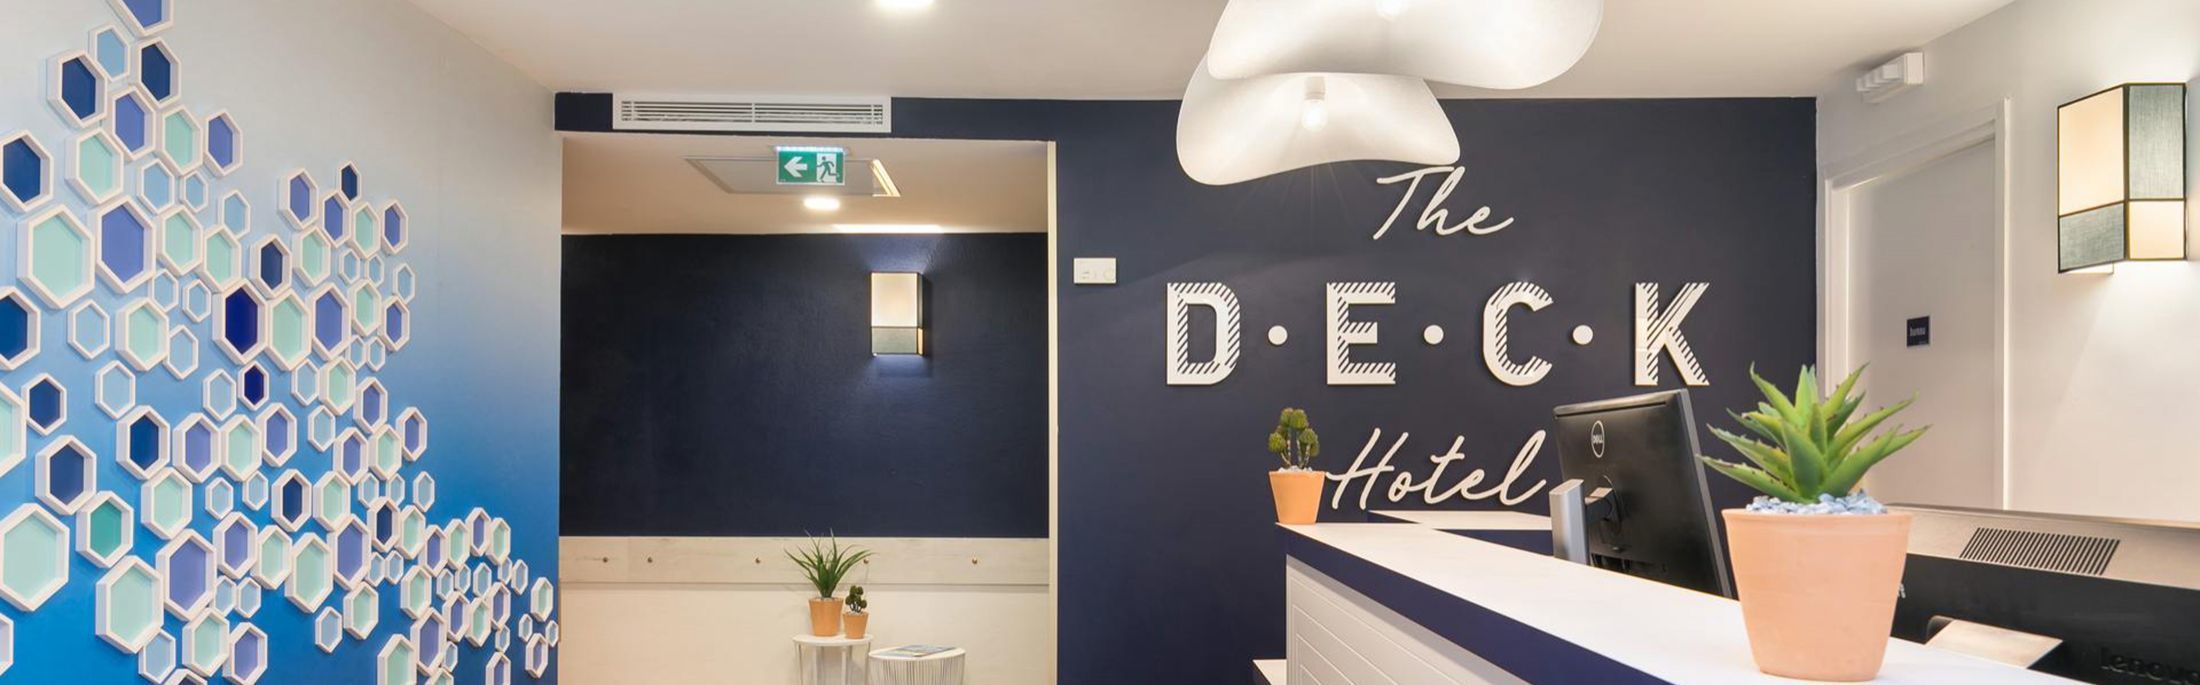 The Deck Hotel by HappyCulture - Reception